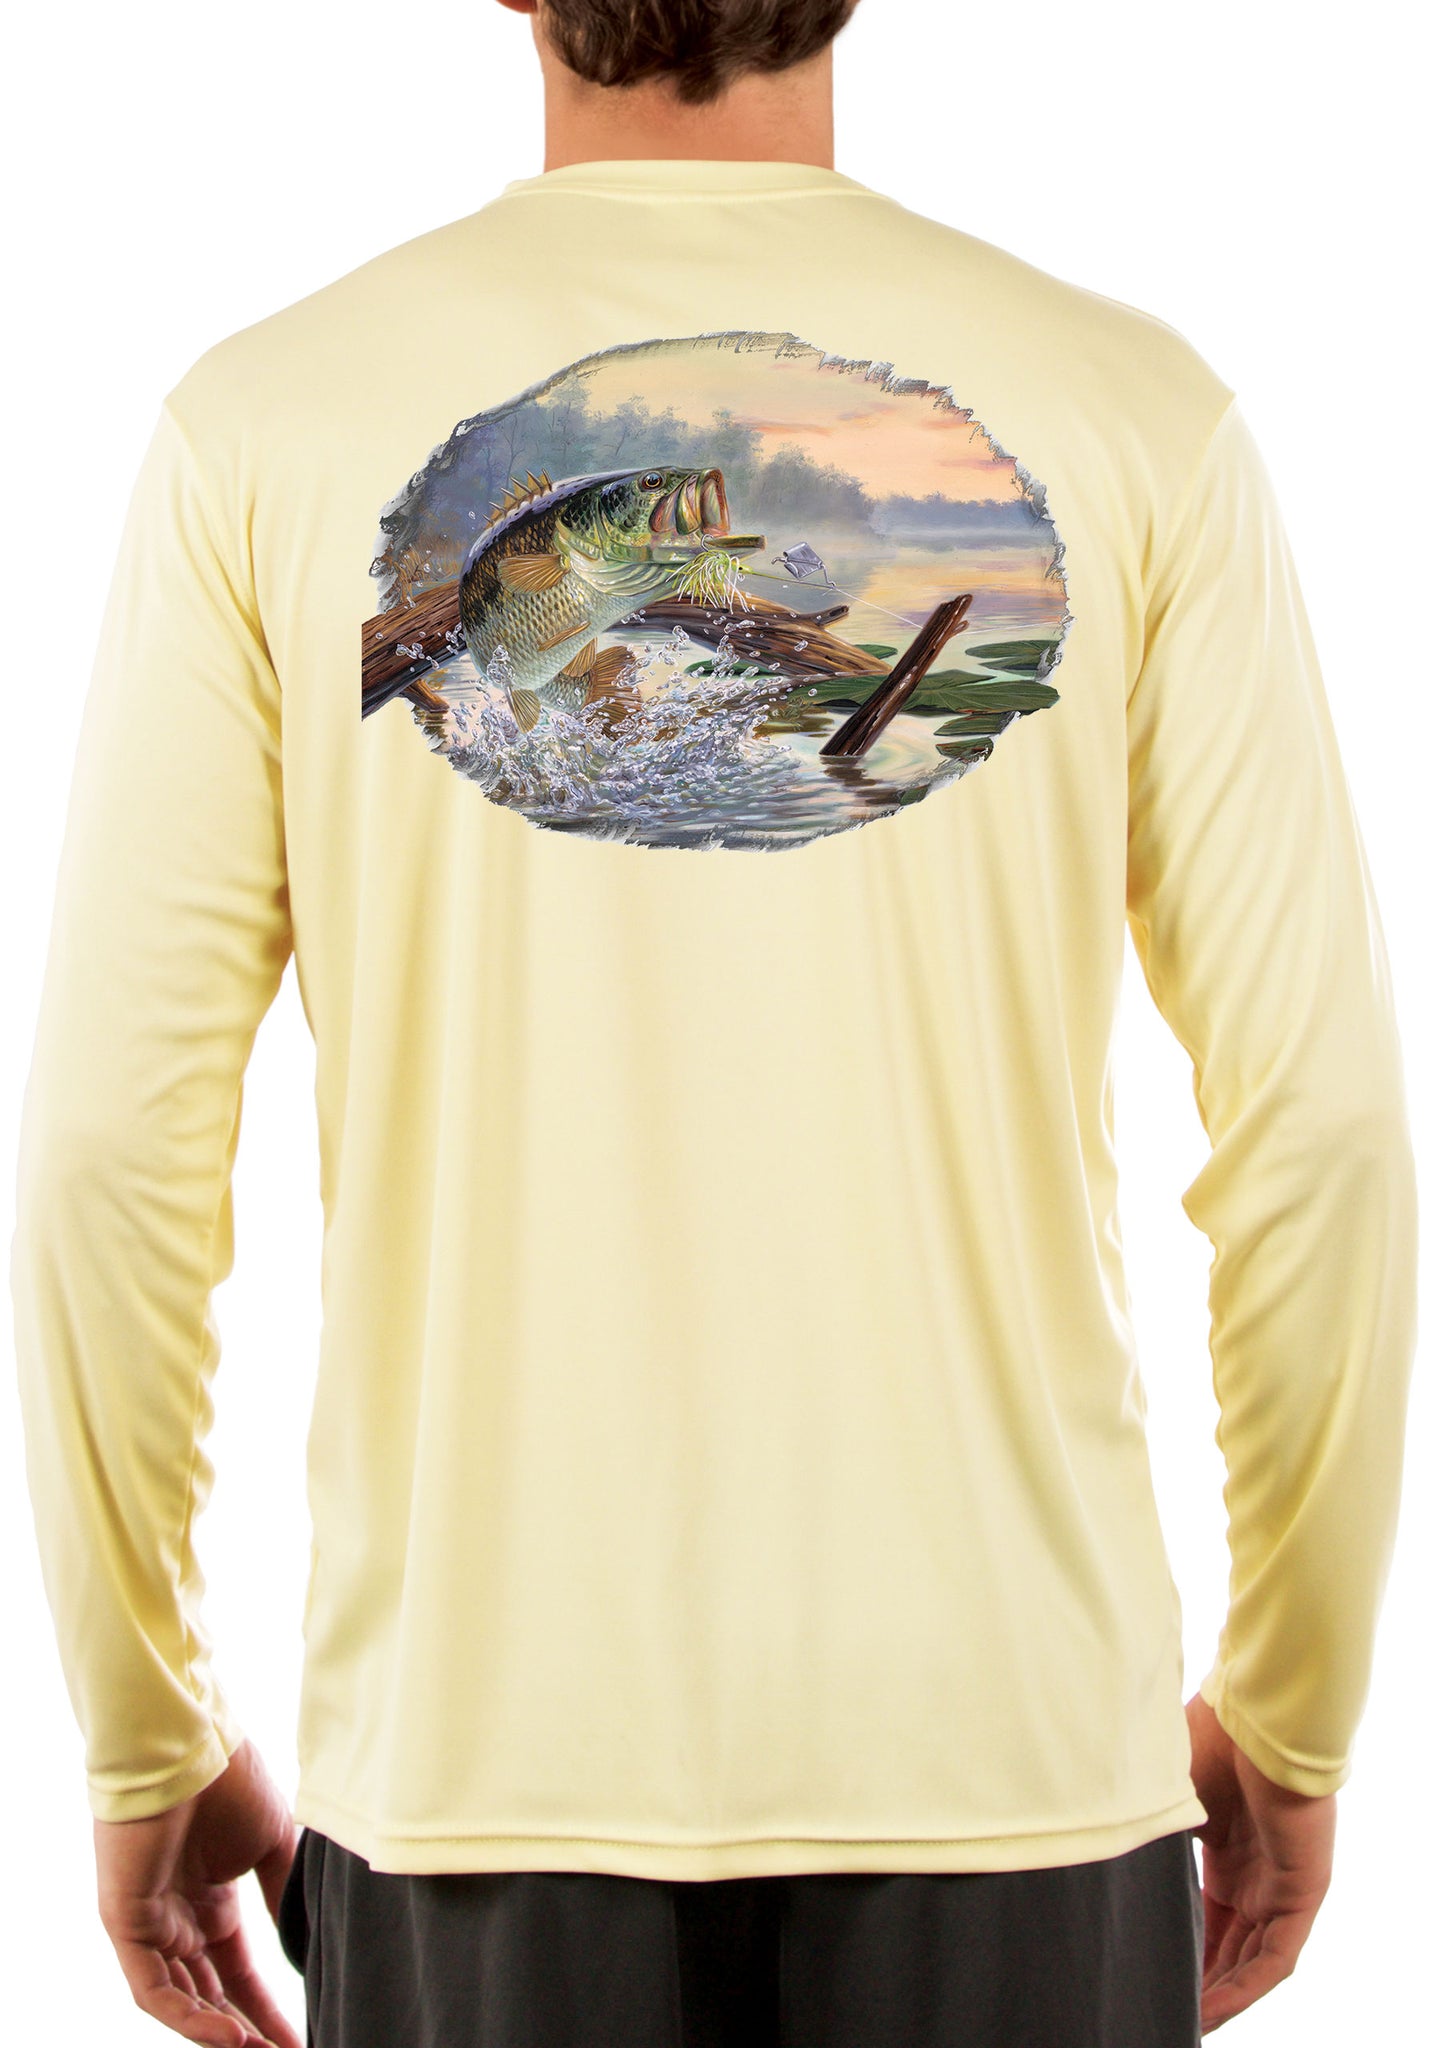 Striped Bass Fishing Shirts with Baitfish by Artist Randy McGovern Ice Blue / X-Large